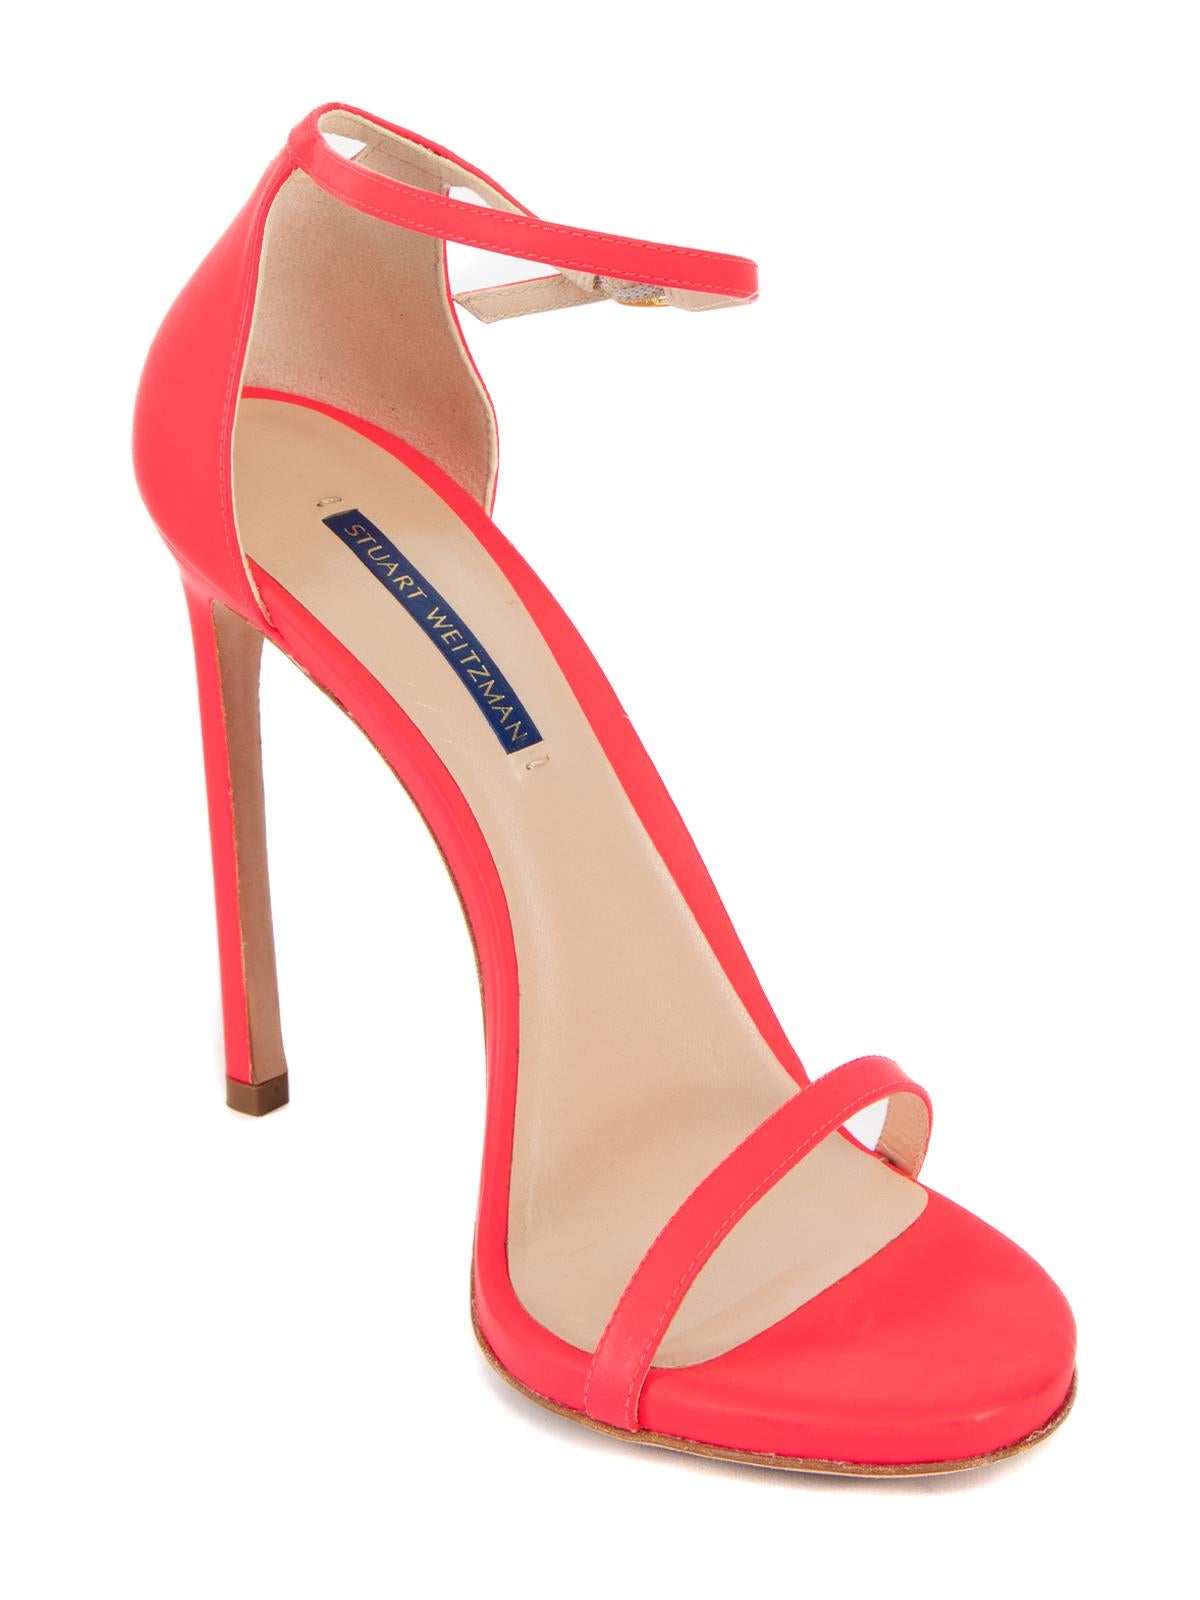 CONDITION is Very good. Minimal wear to heels is evident. Minimal wear to the outsole on this used Stuart Weitzman designer resale item. This is item comes with the original shoe box  Details  Neon pink Matt leather Heeled sandals Open almond toe